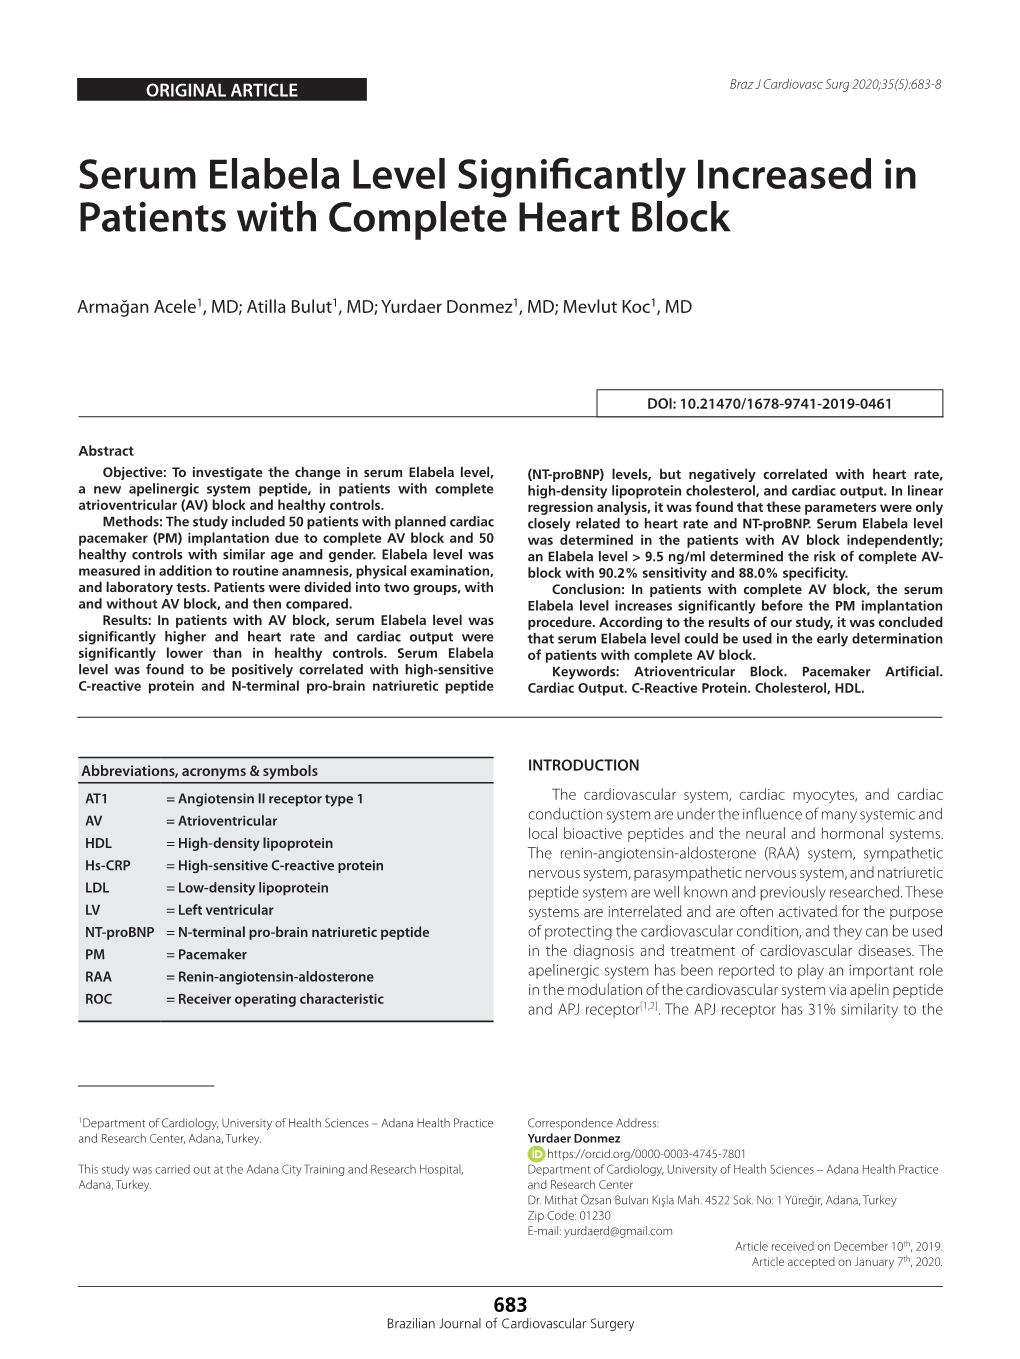 Serum Elabela Level Significantly Increased in Patients with Complete Heart Block